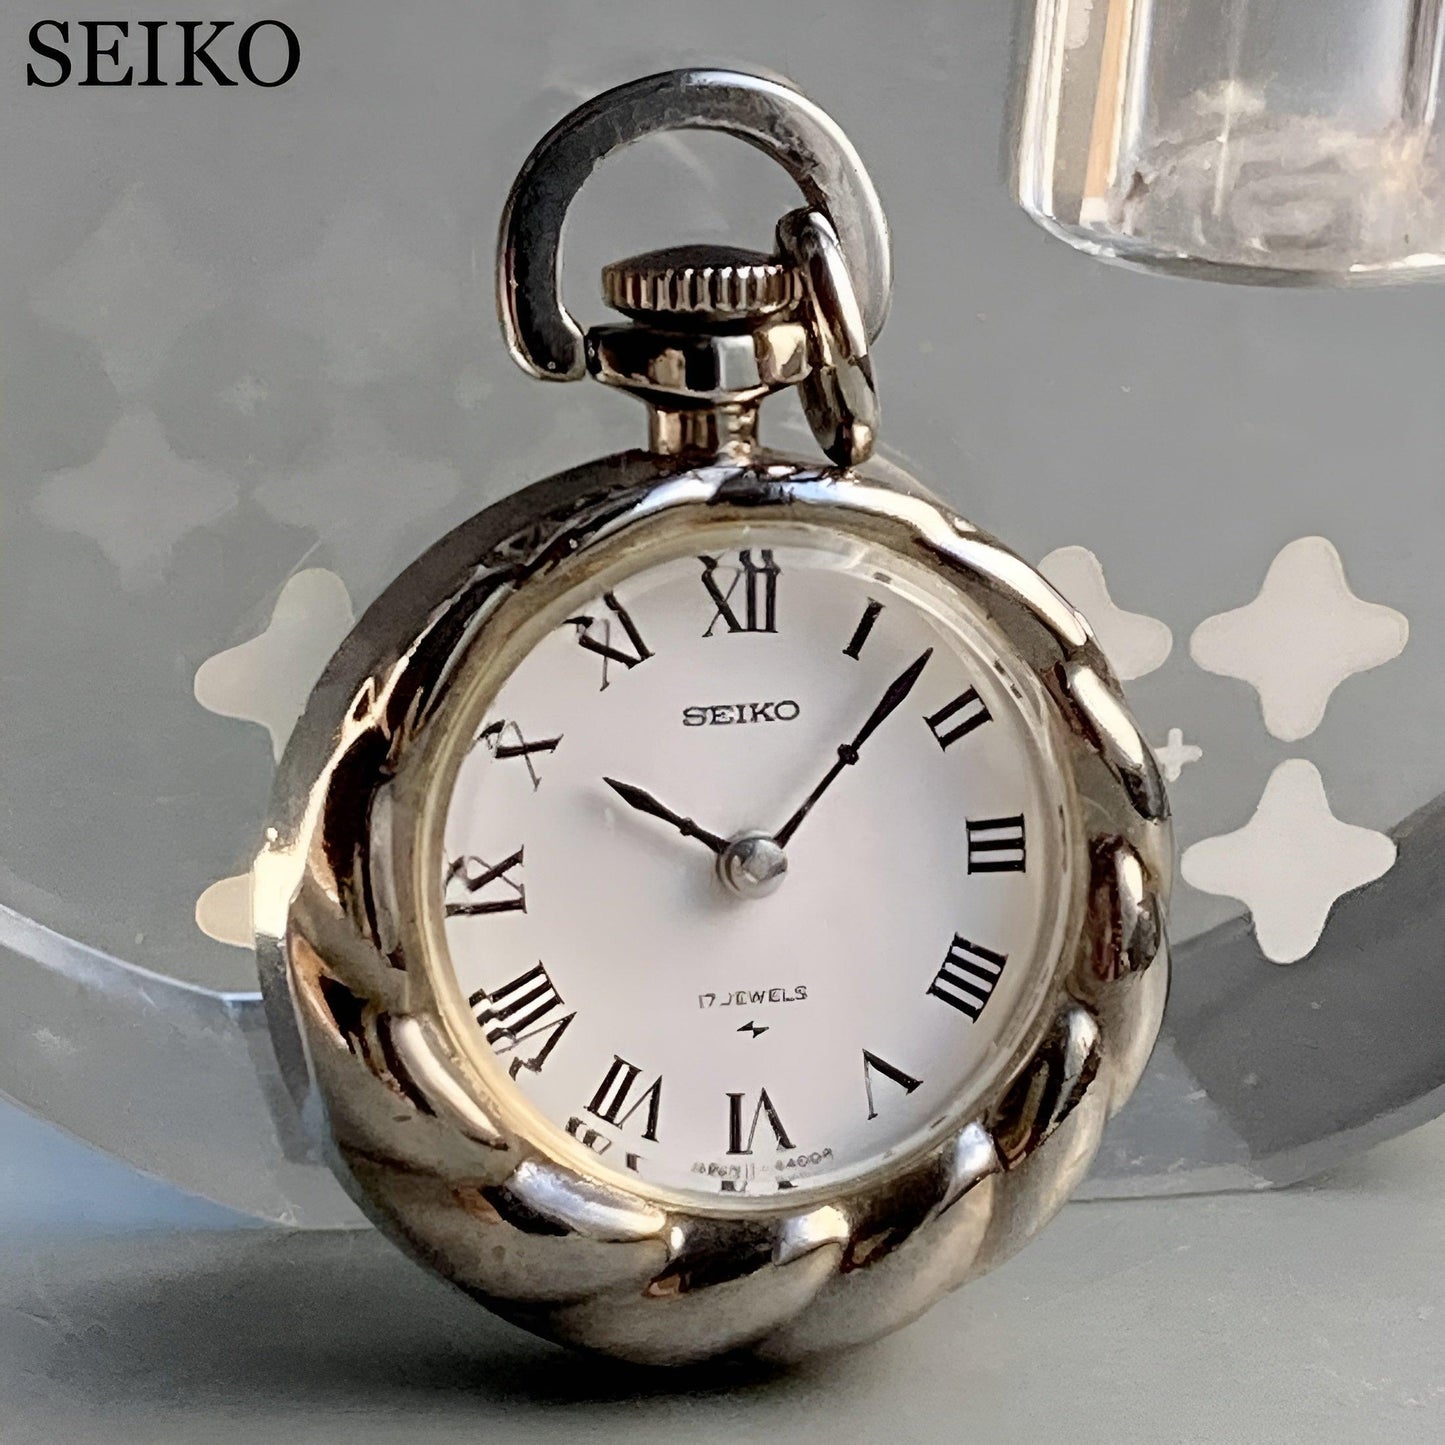 Seiko Pocket Antique Watch 1965 Manual Winding Vintage Pocket Watch Silver - Murphy Johnson Watches Co.